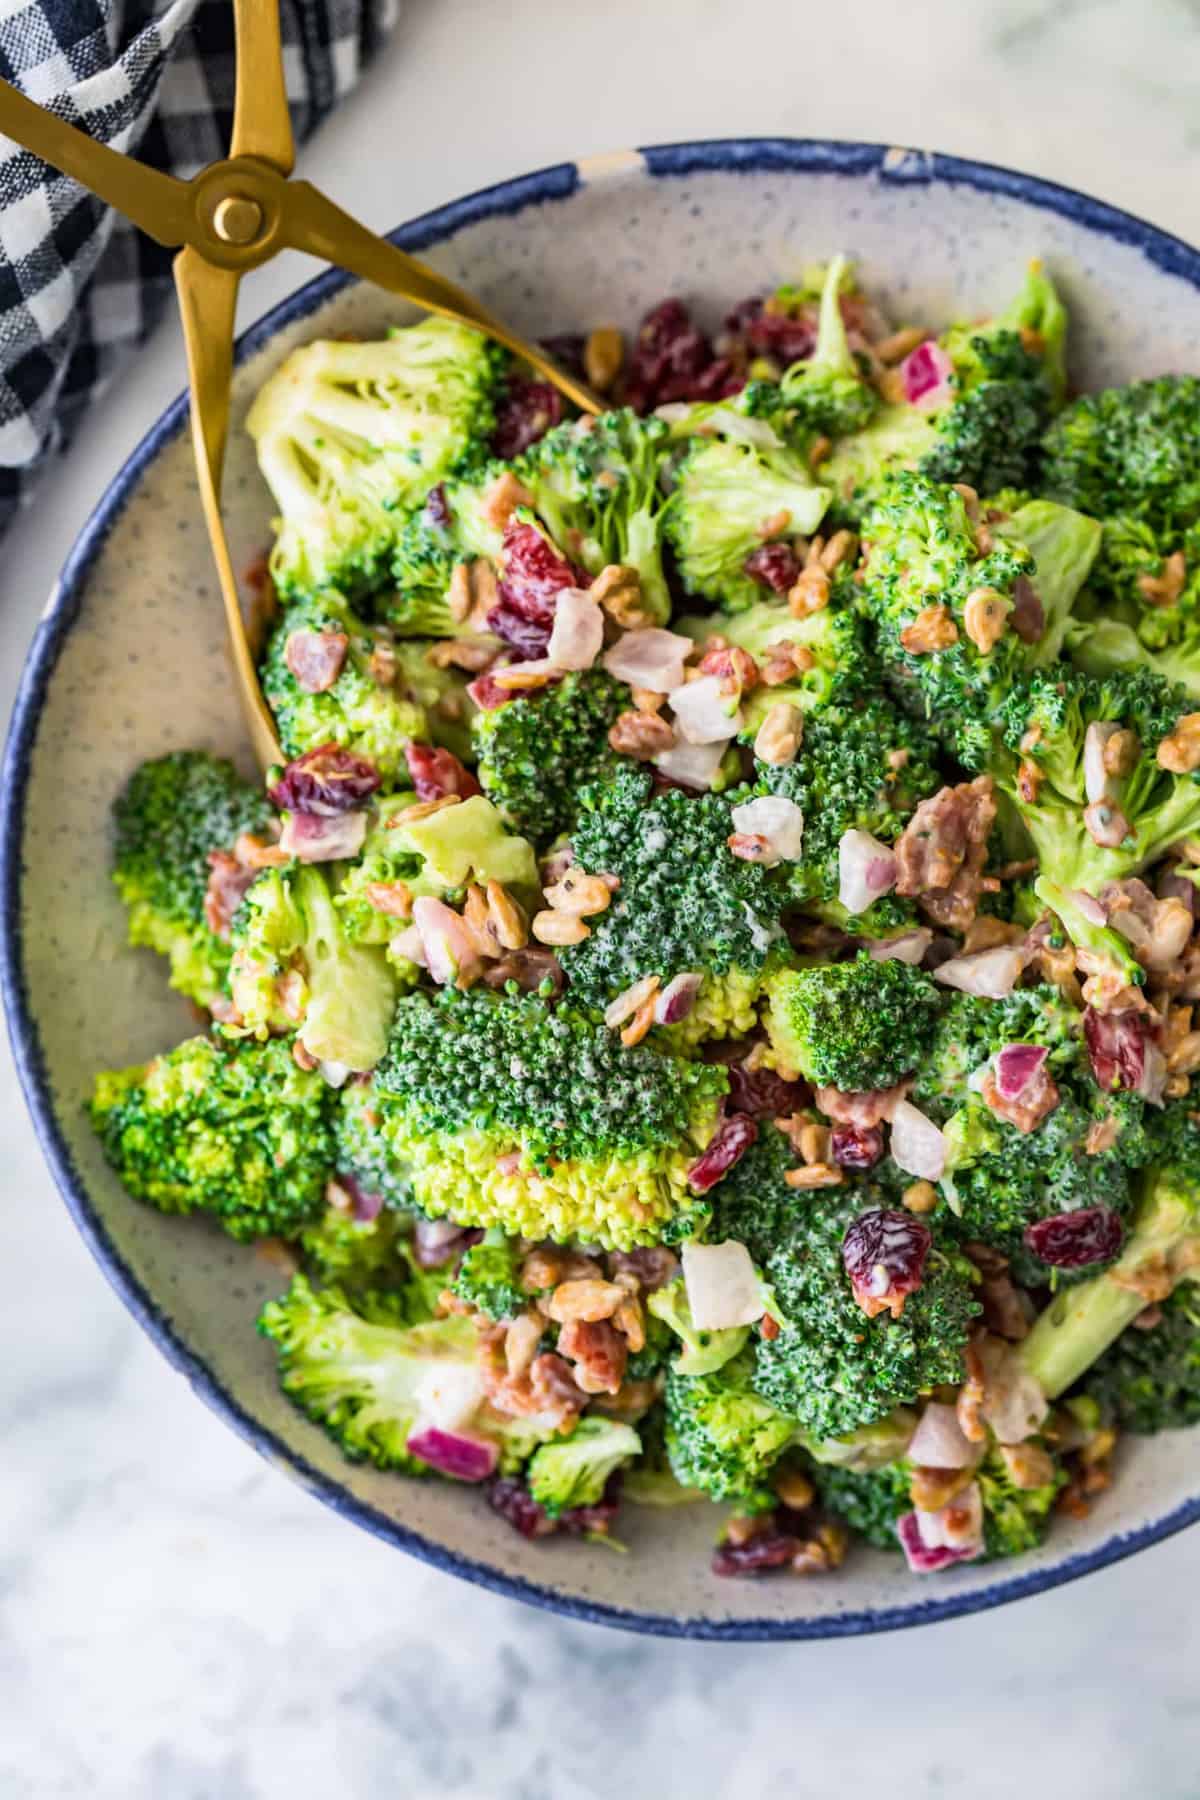 Broccoli salad in a large serving bowl